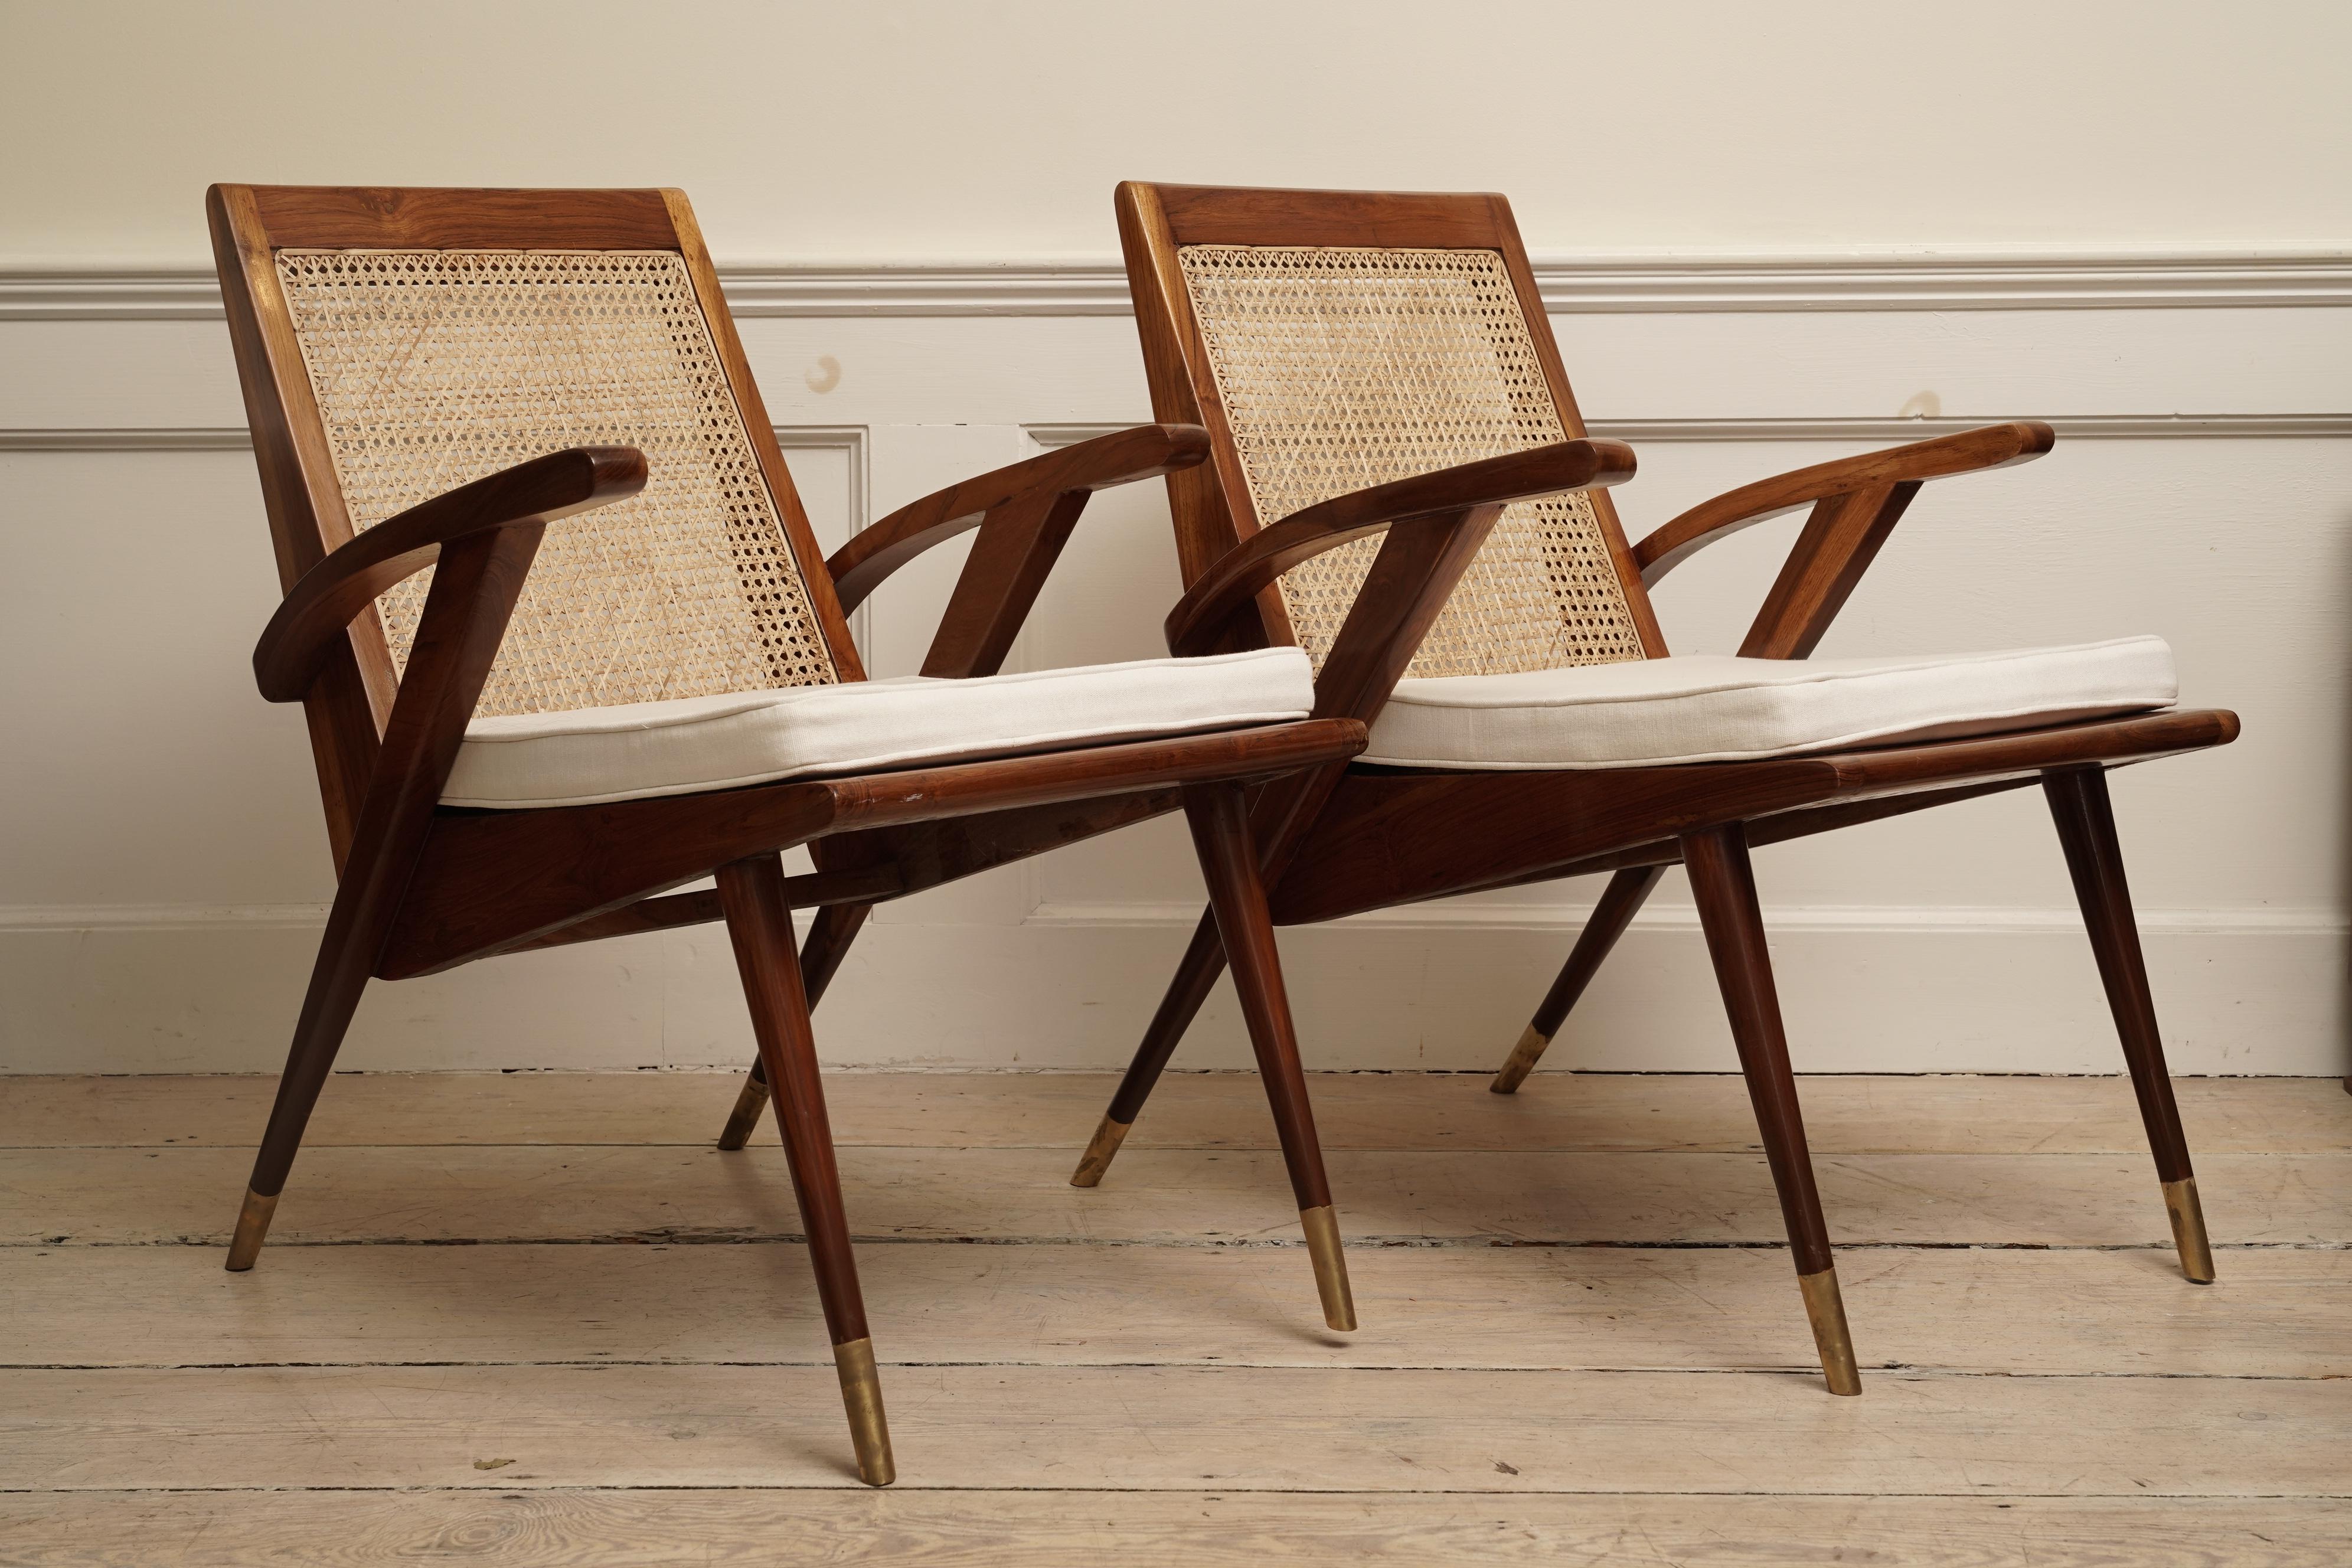 Pair of Mid-Century Modern Teak Caned Side or Lounge Chairs with White Cushions 1